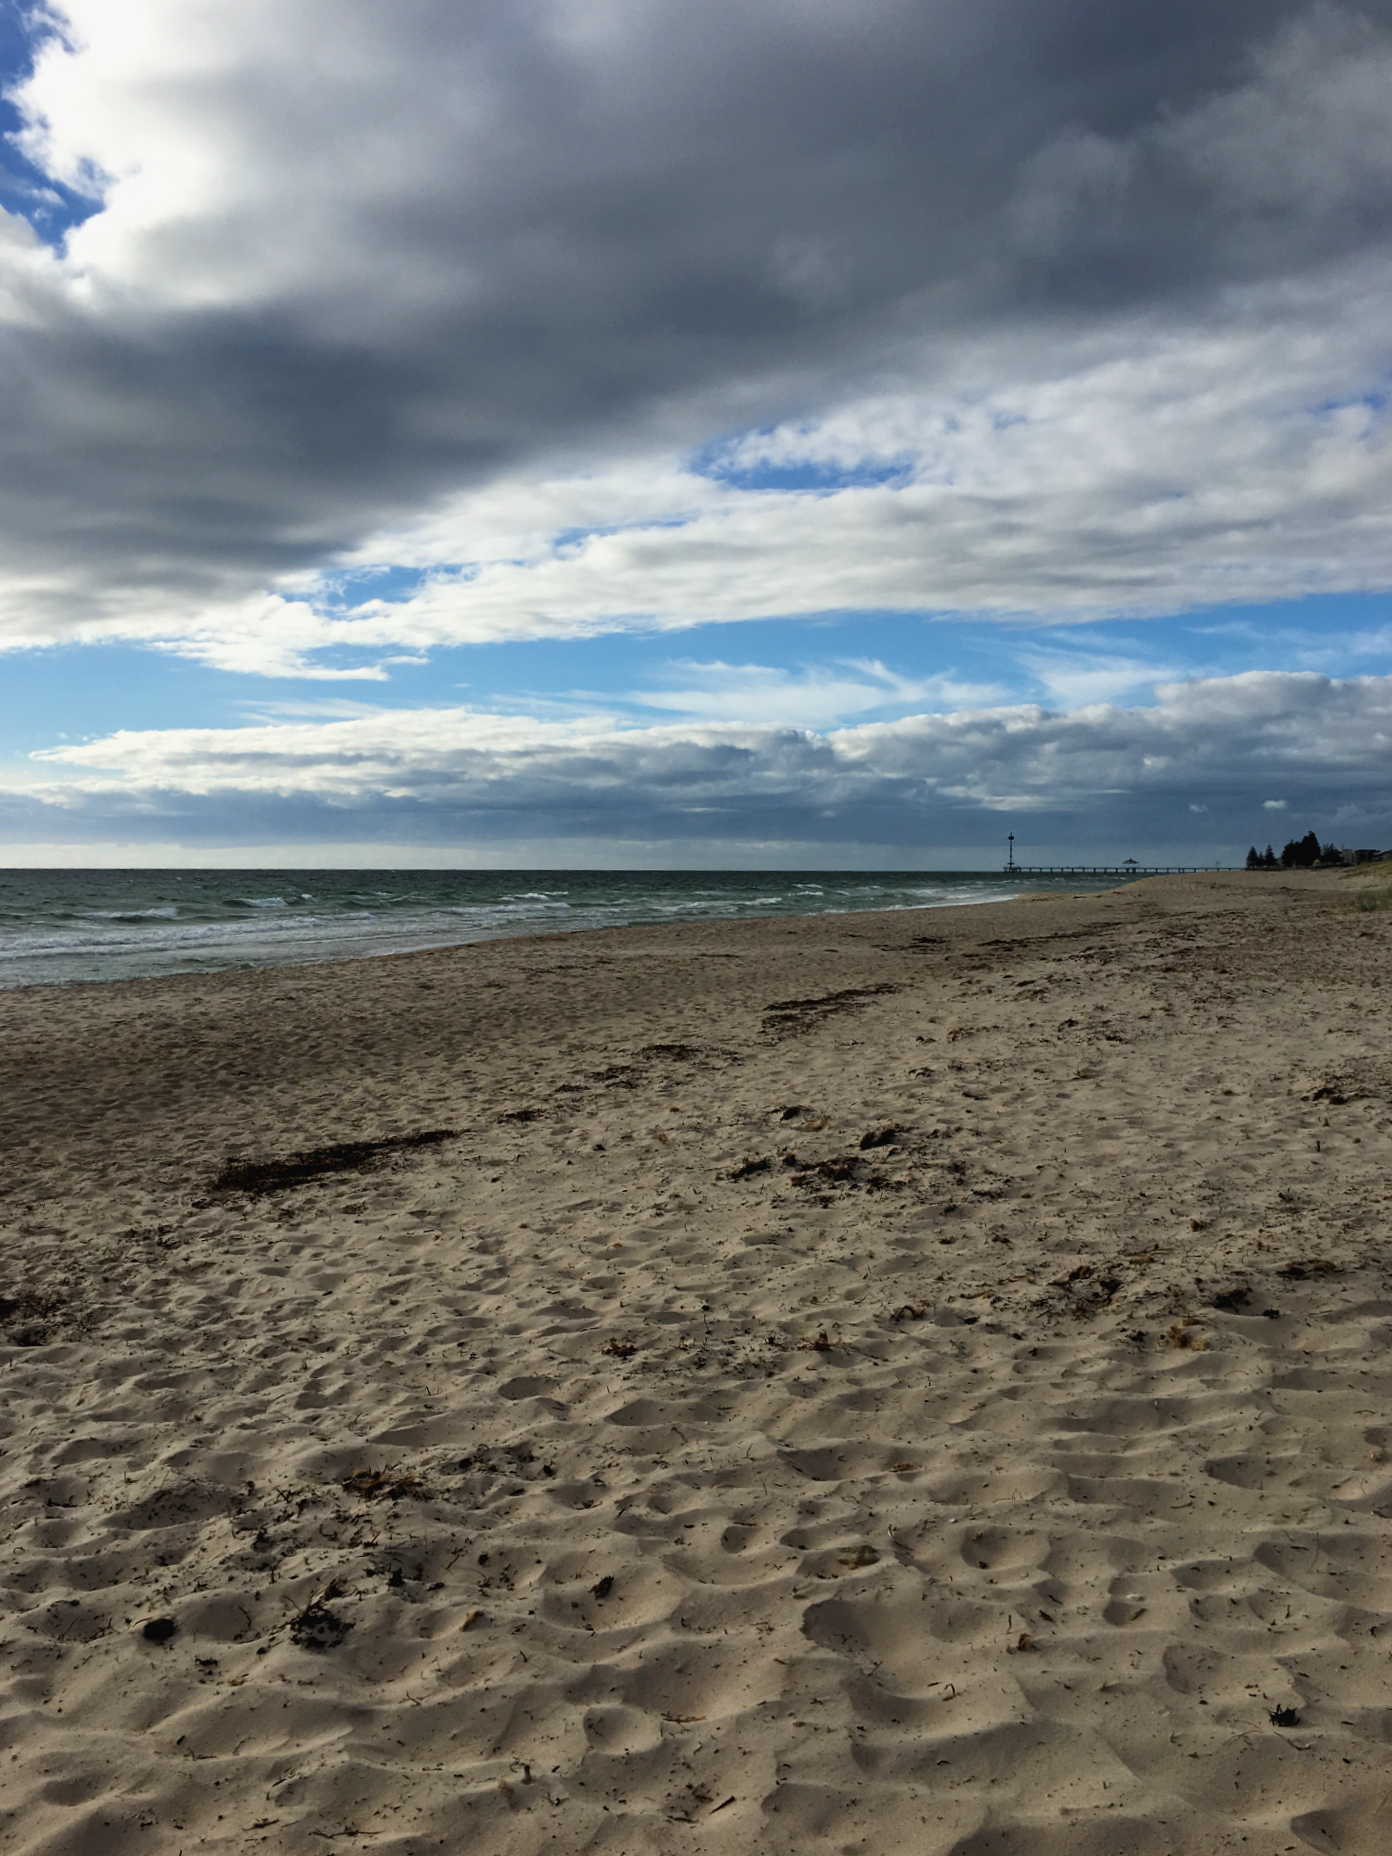 Sandy beach with partly cloudy skies